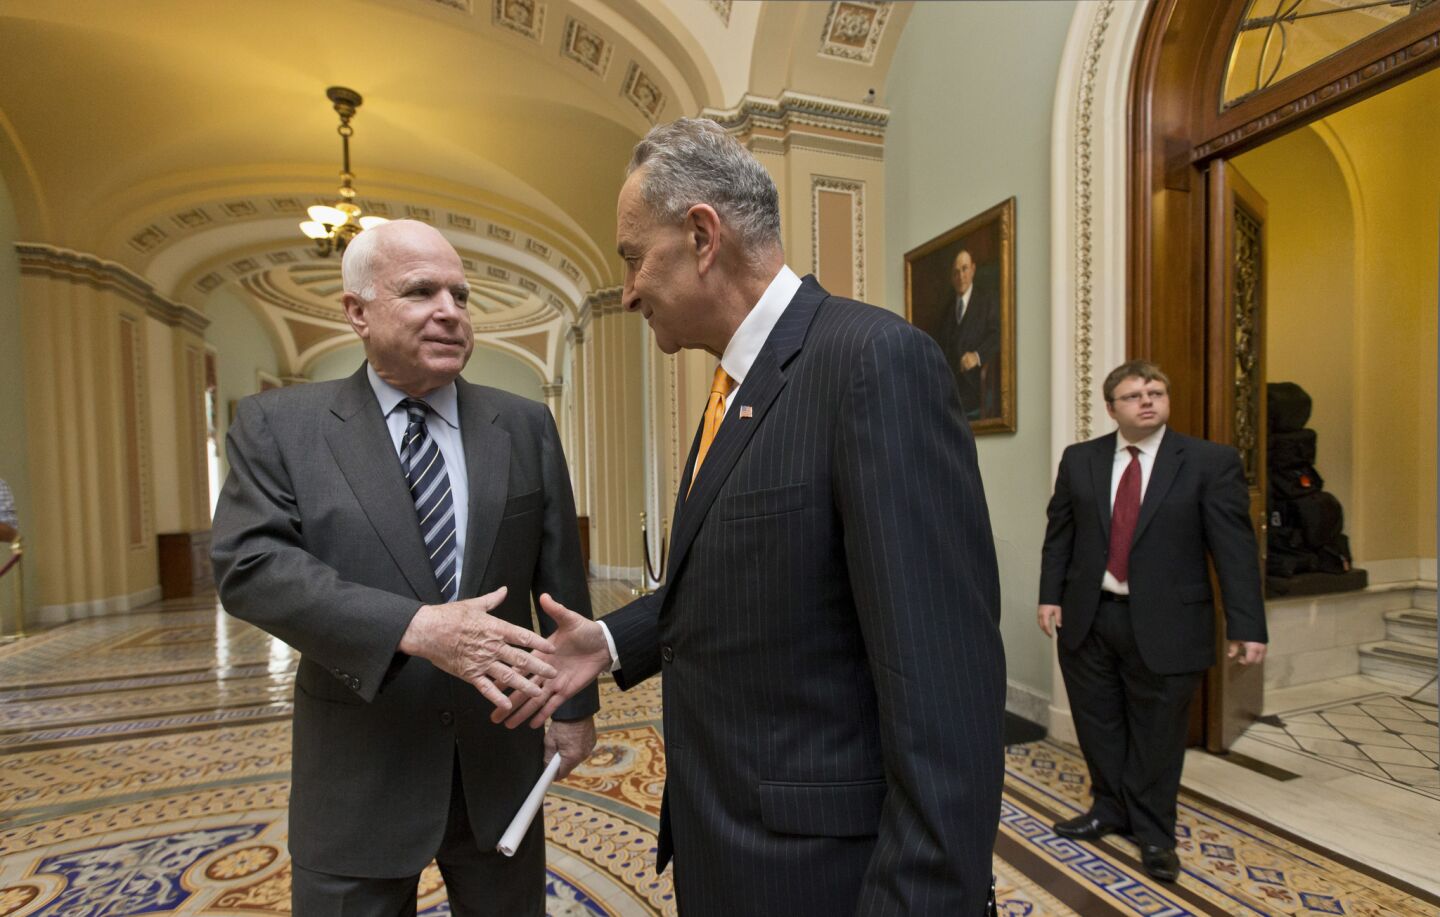 Sen. John McCain (R-Ariz.), left, and Sen. Charles Schumer (D-N.Y.), members of the bipartisan "Gang of Eight" who crafted the immigration bill, shake hands on Capitol Hill in Washington.